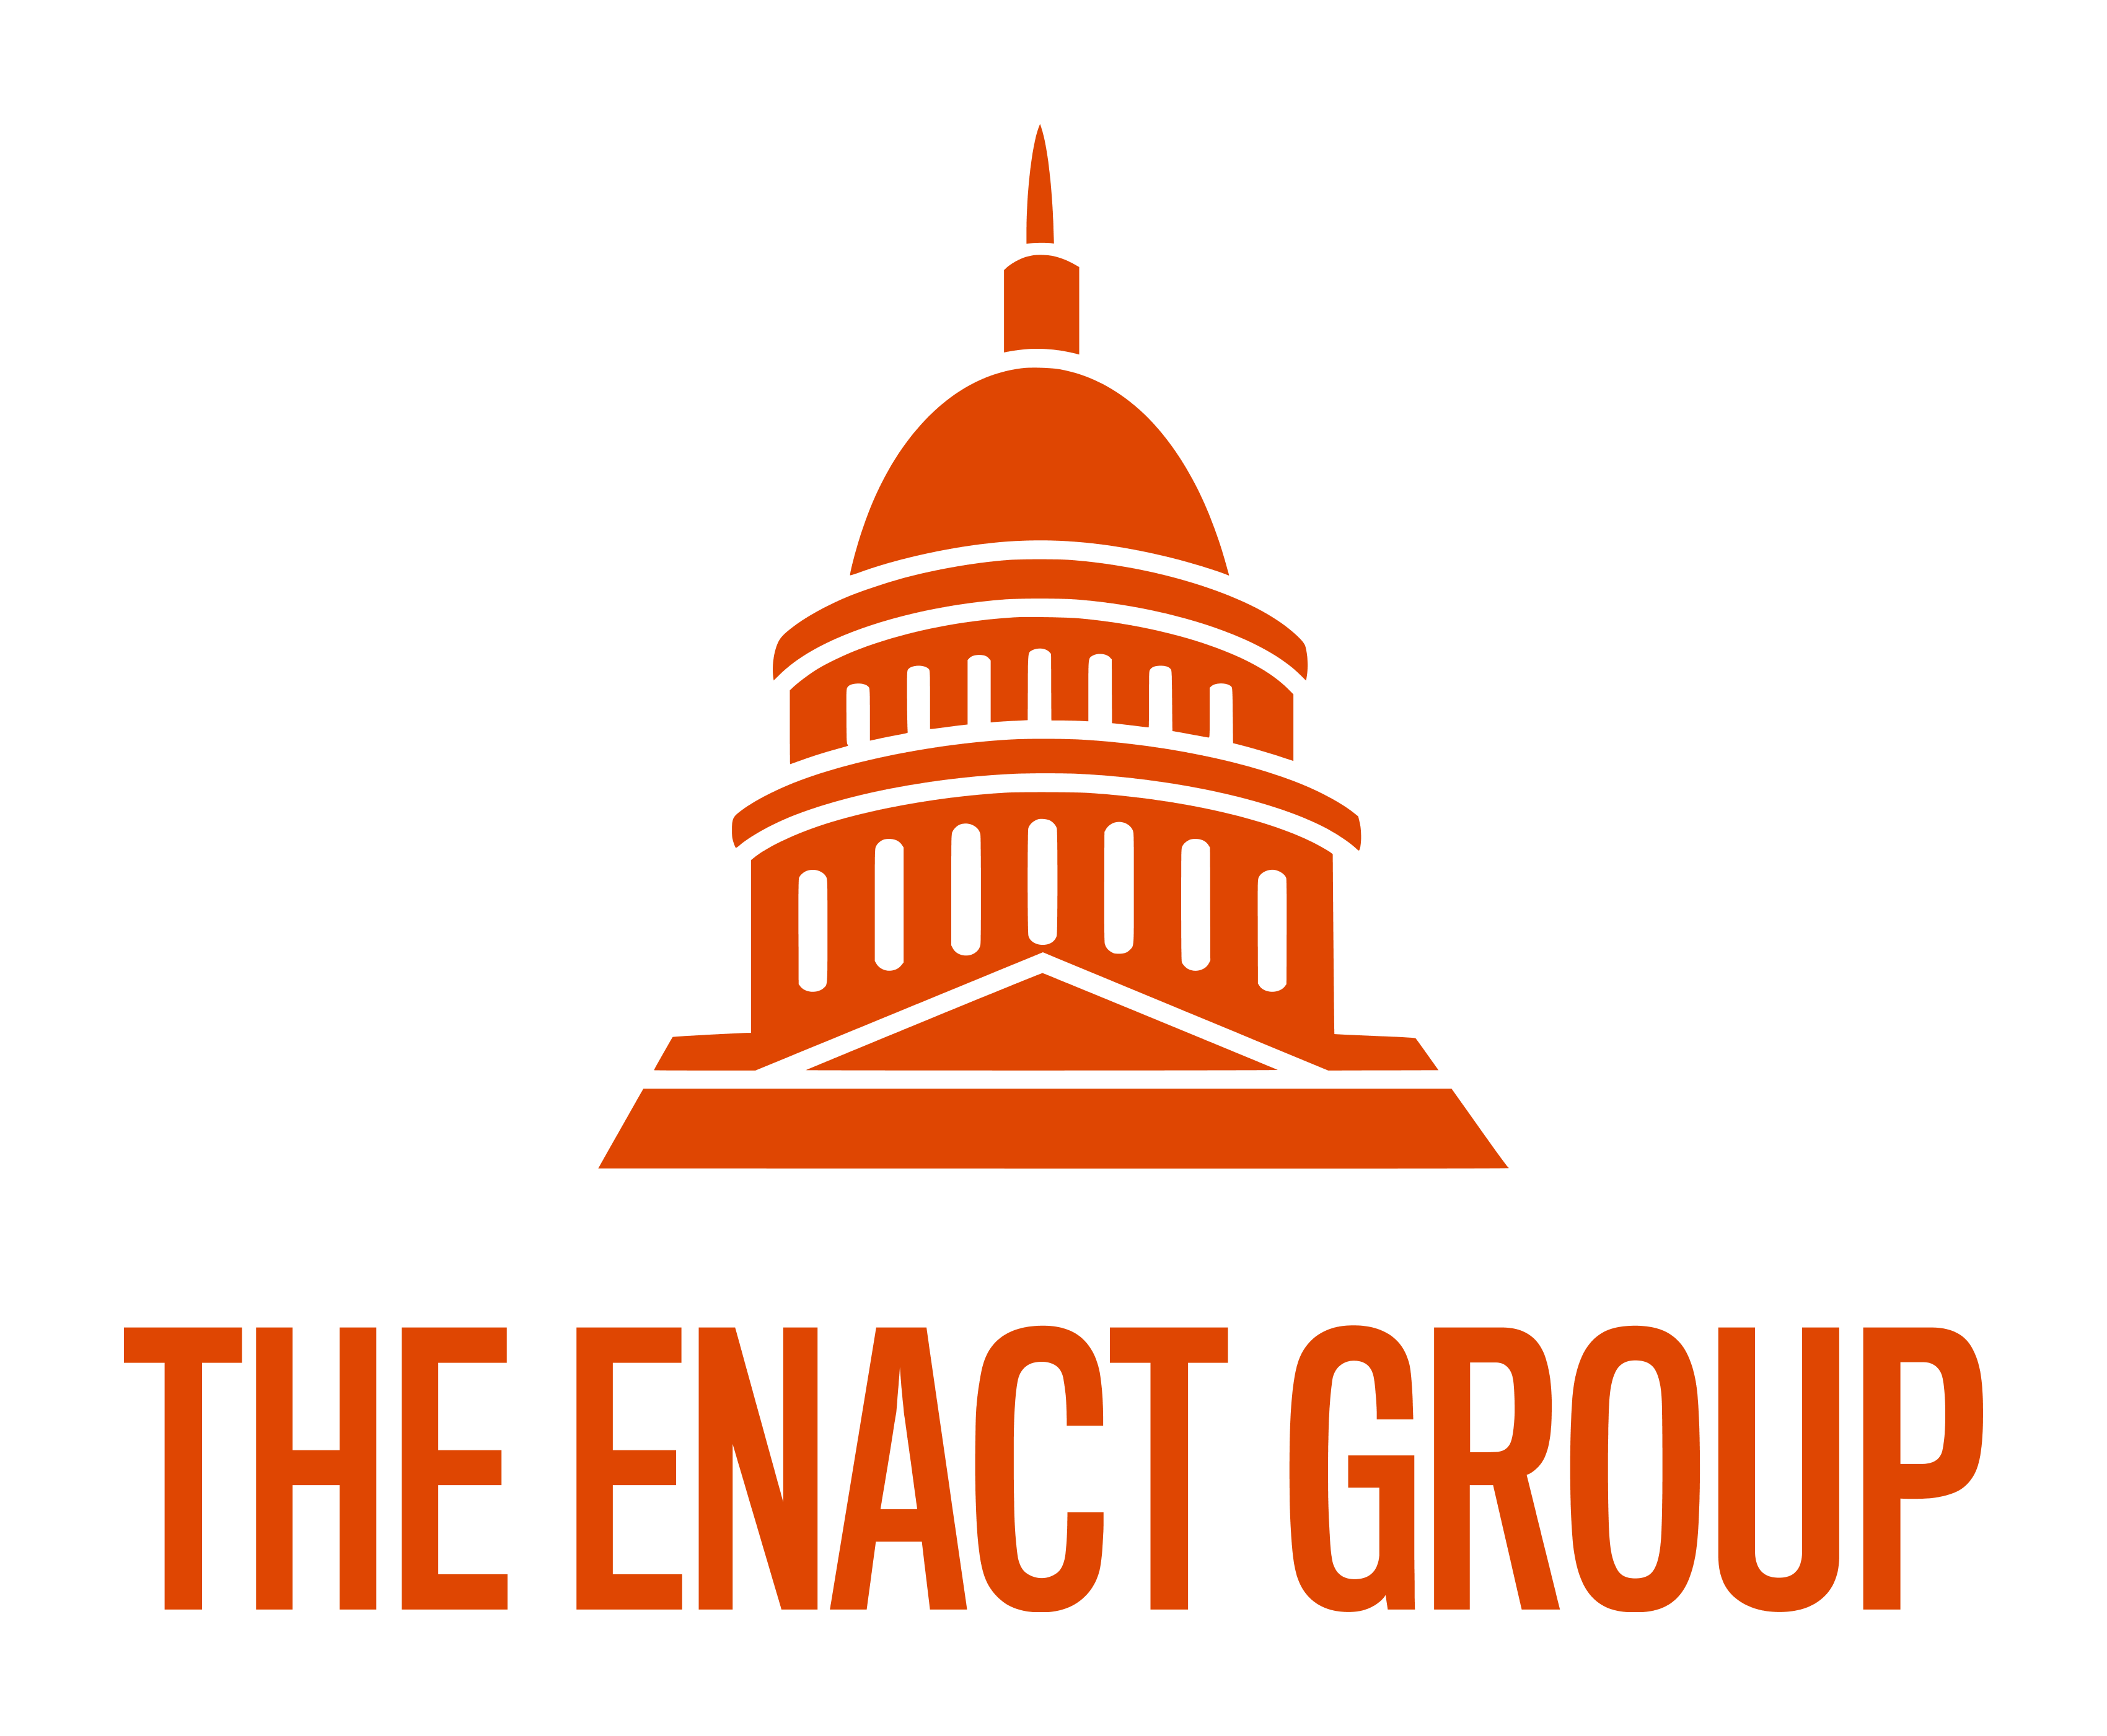 Sponsored link to The Enact Group